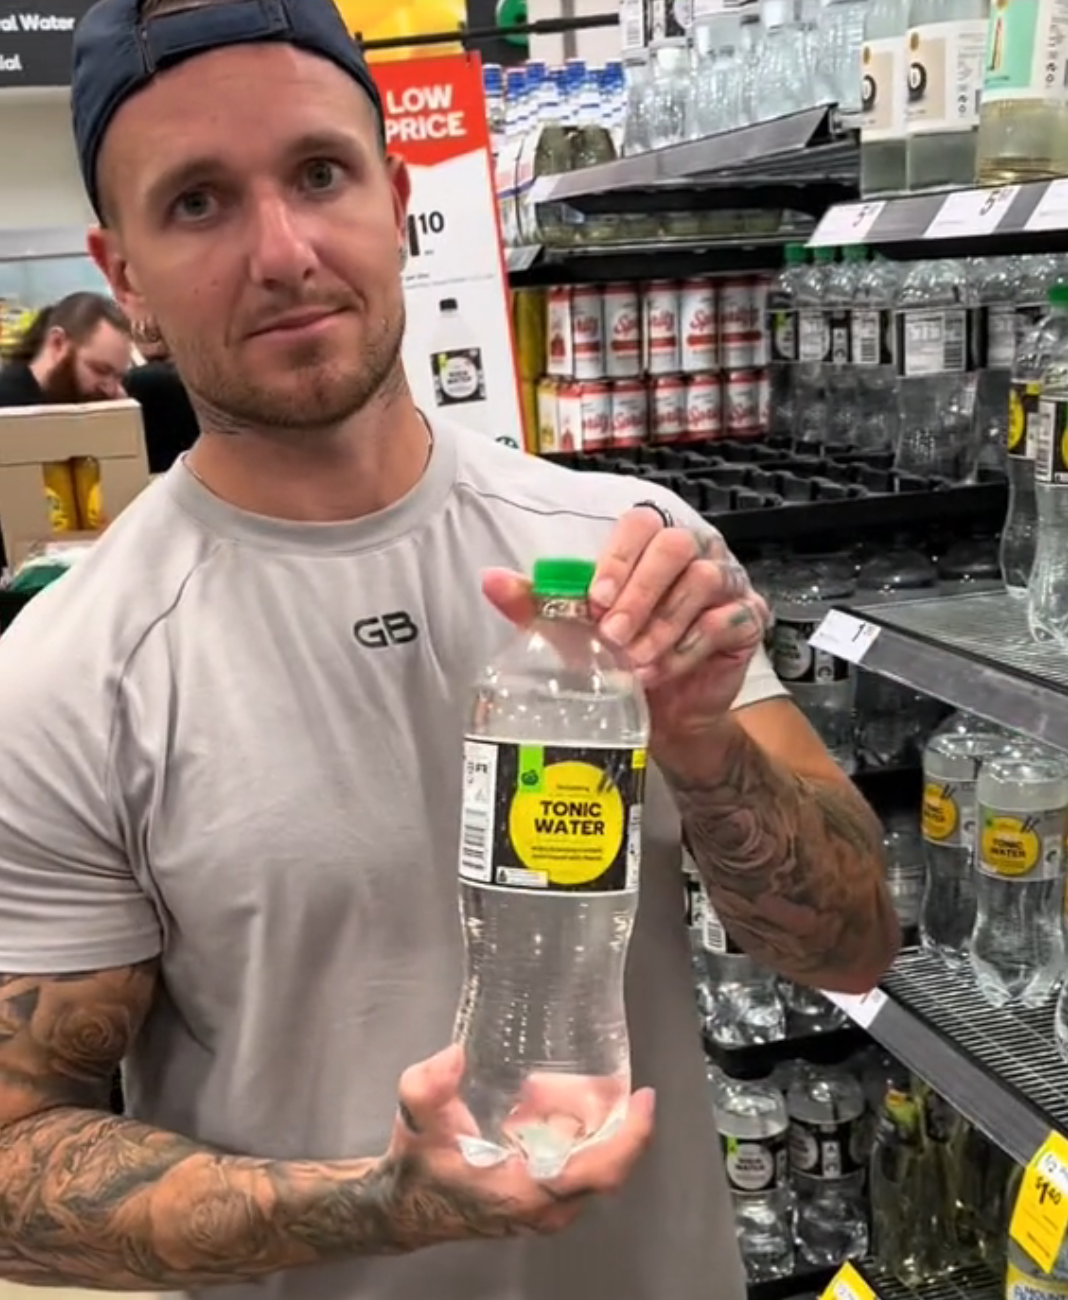 A man holds up a bottle of tonic water in the supermarket